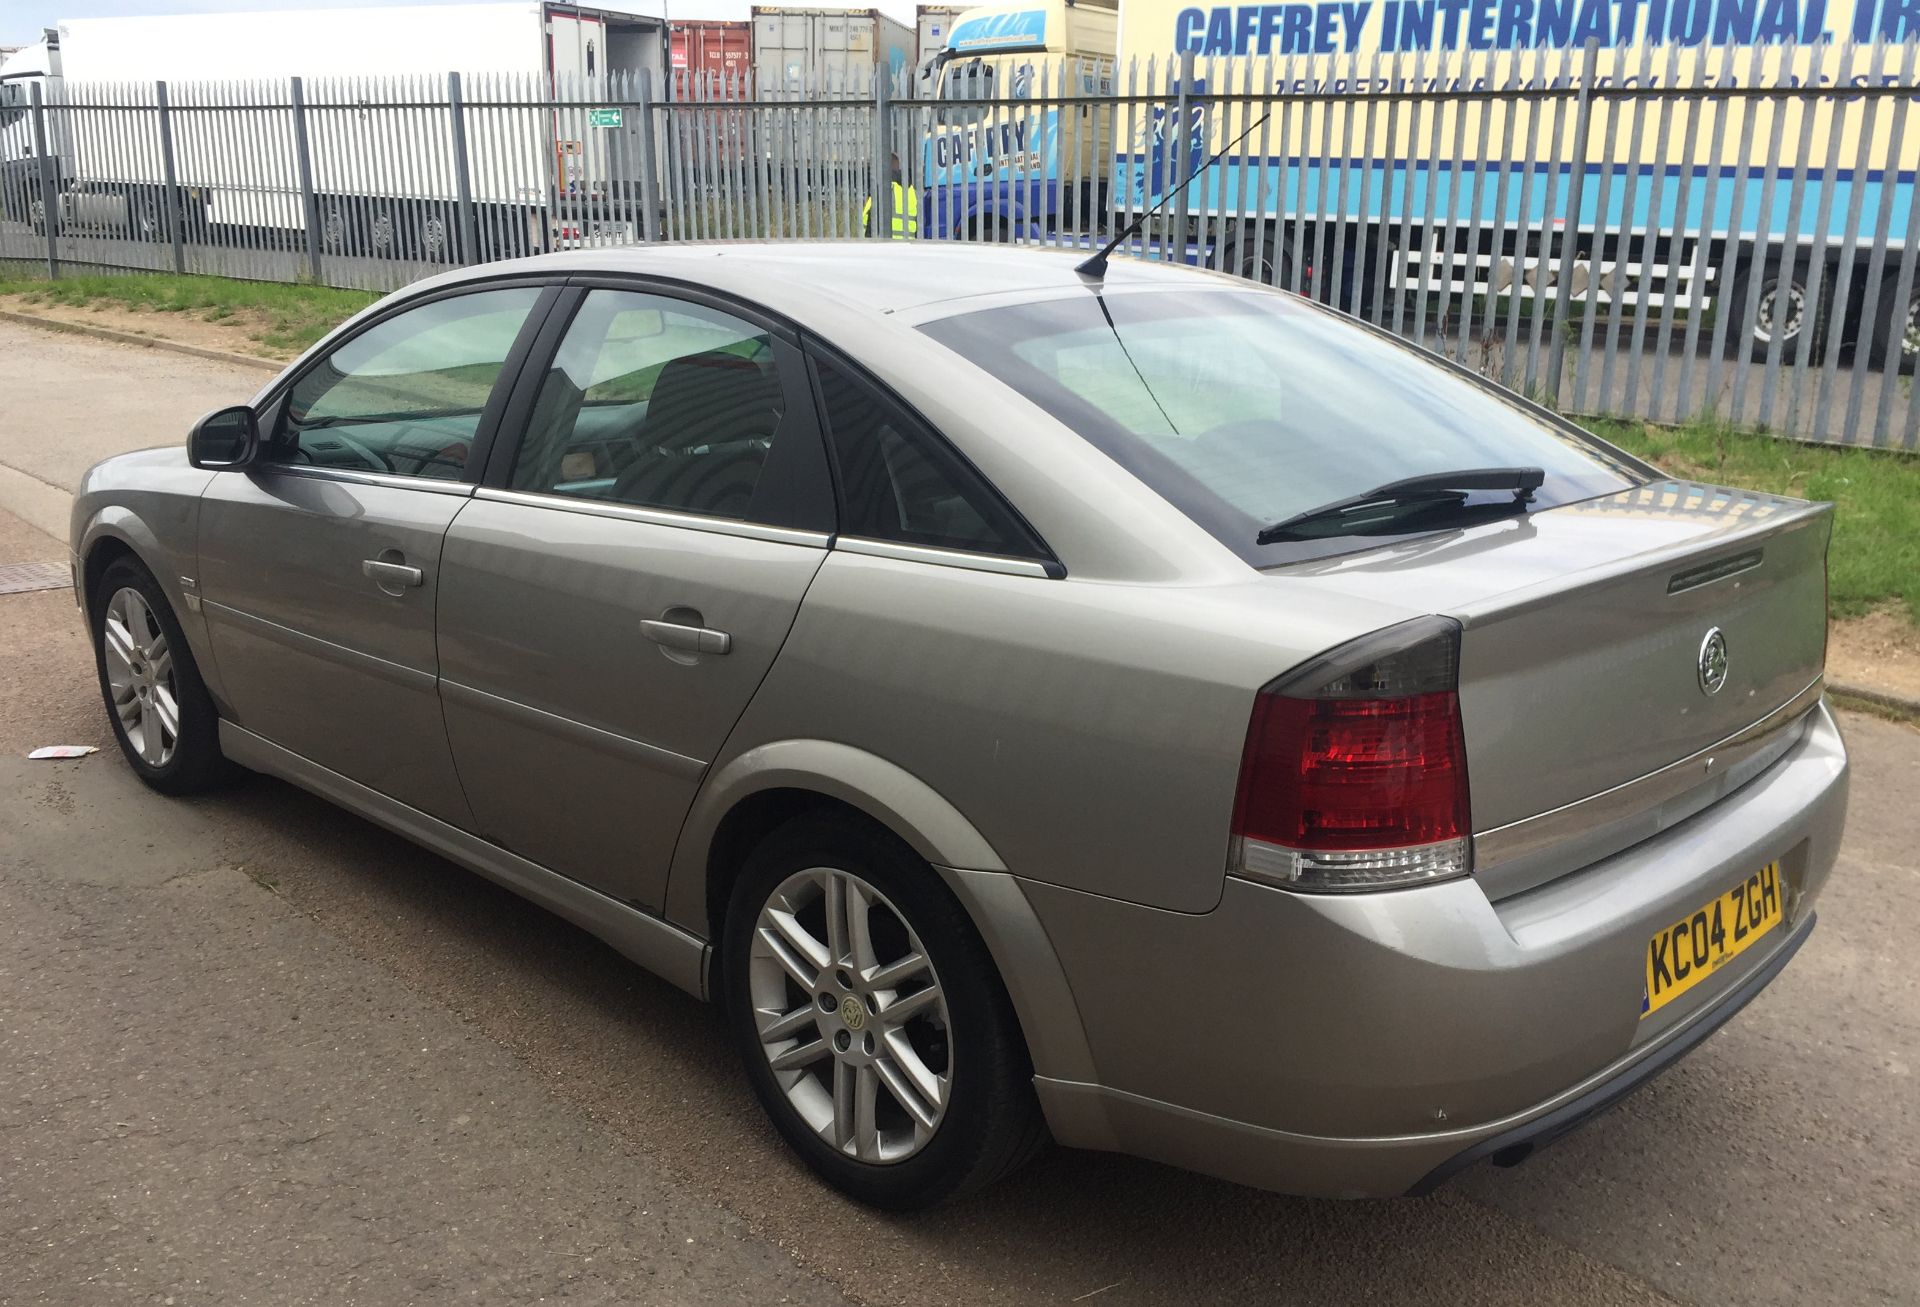 2004 Vauxhall Vectra 2.2 Sri Automatic 4 Dr Saloon - CL505 - NO VAT ON THE HAMMER - Location: - Image 4 of 7